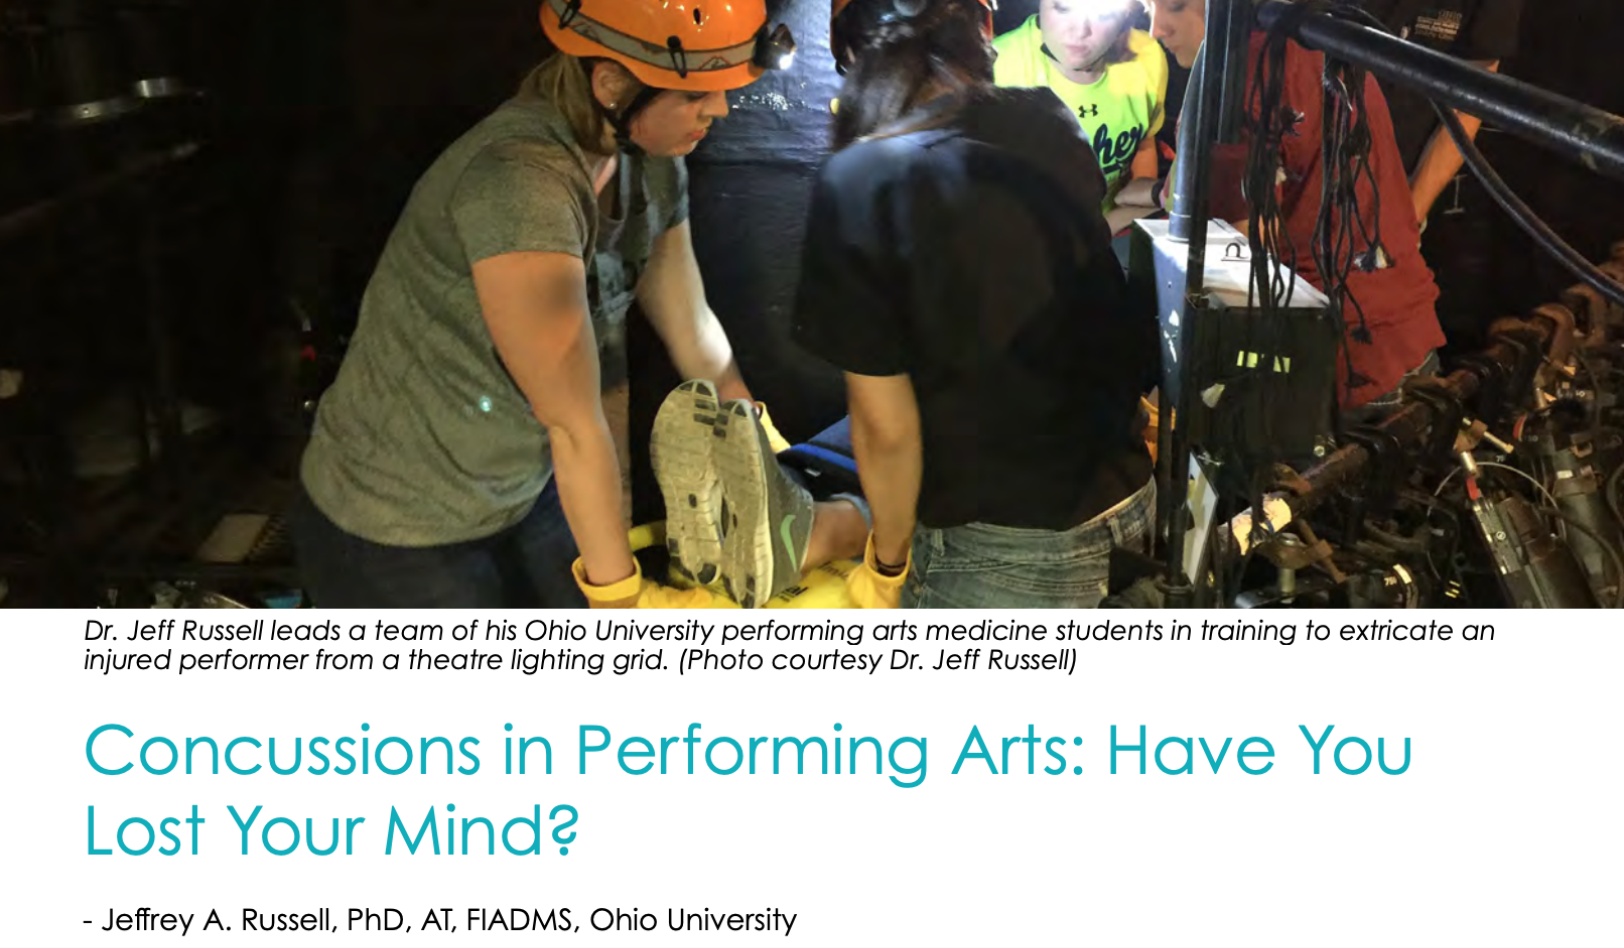 Concussions in Performing Arts: Have You Lost Your Mind?